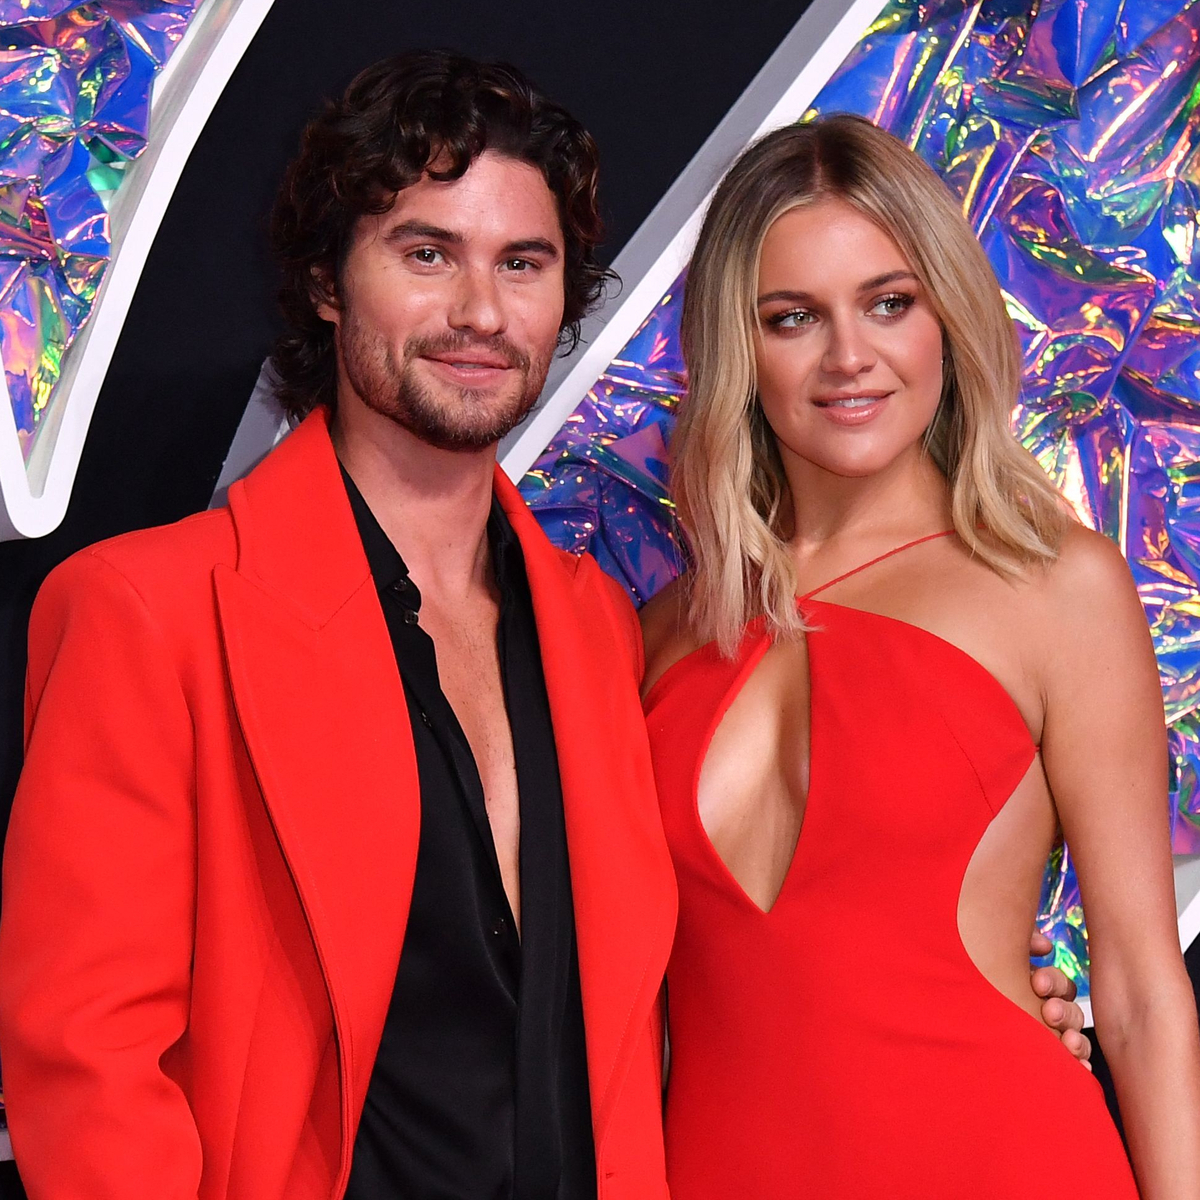 Kelsea Ballerini Shares DMs That Launched Her & Chase Stokes’ Romance